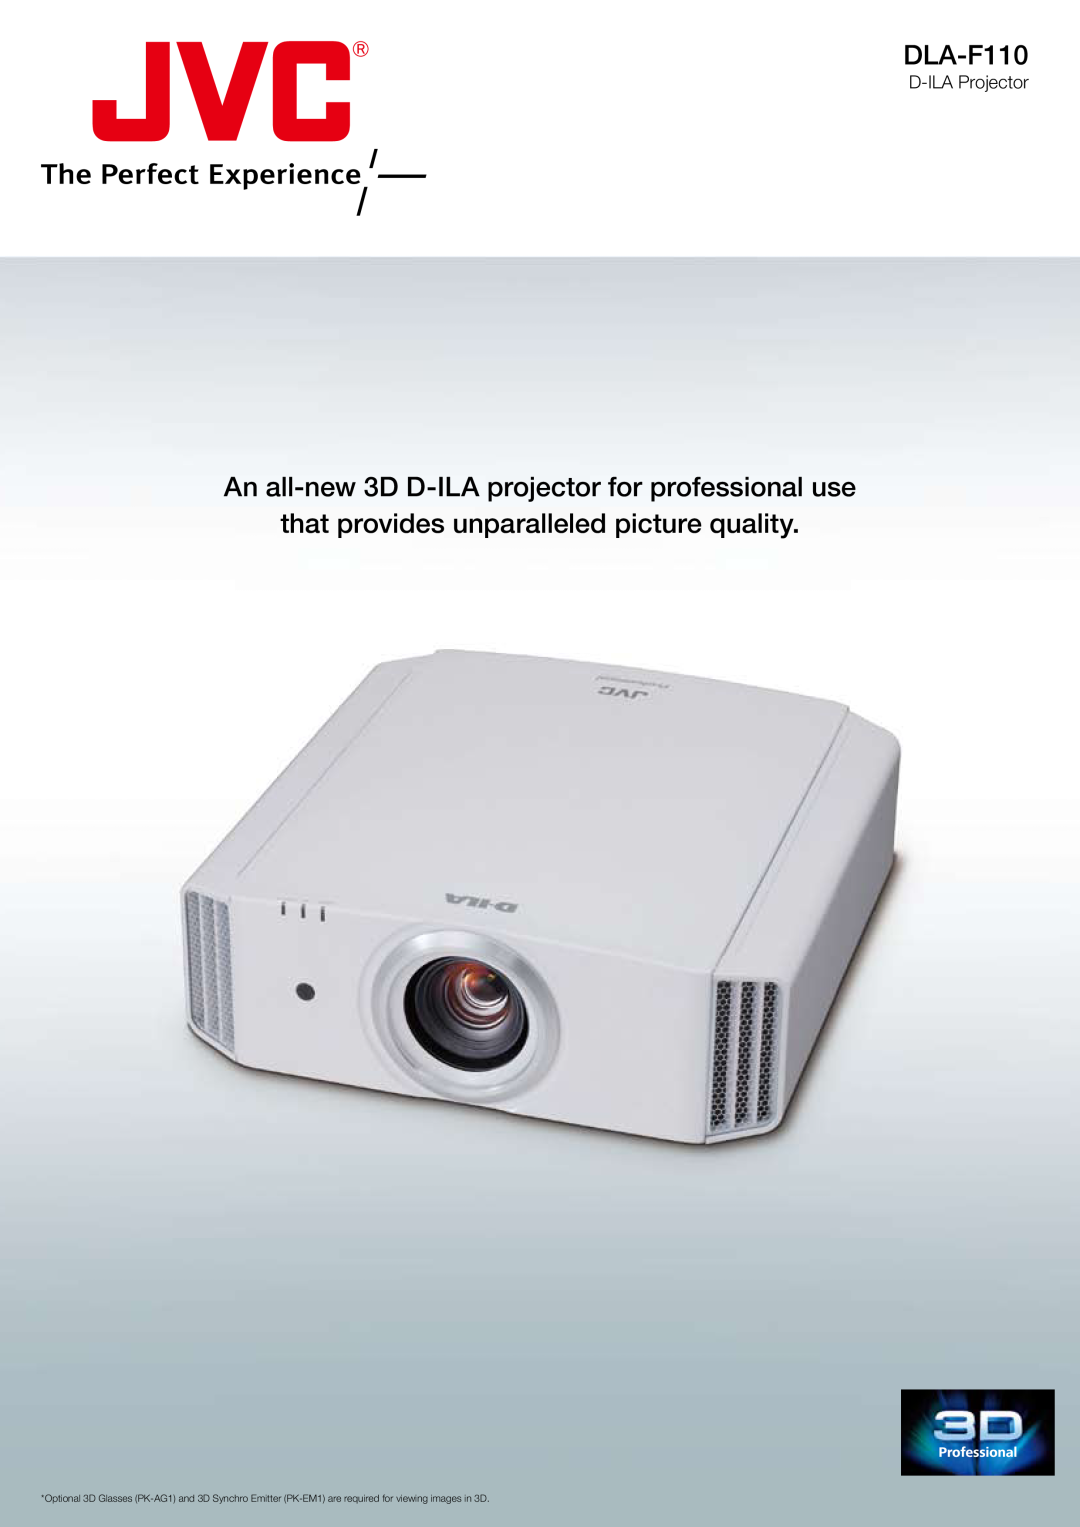 JVC DLA-F110 manual An all-new 3D D-ILA projector for professional use, that provides unparalleled picture quality 